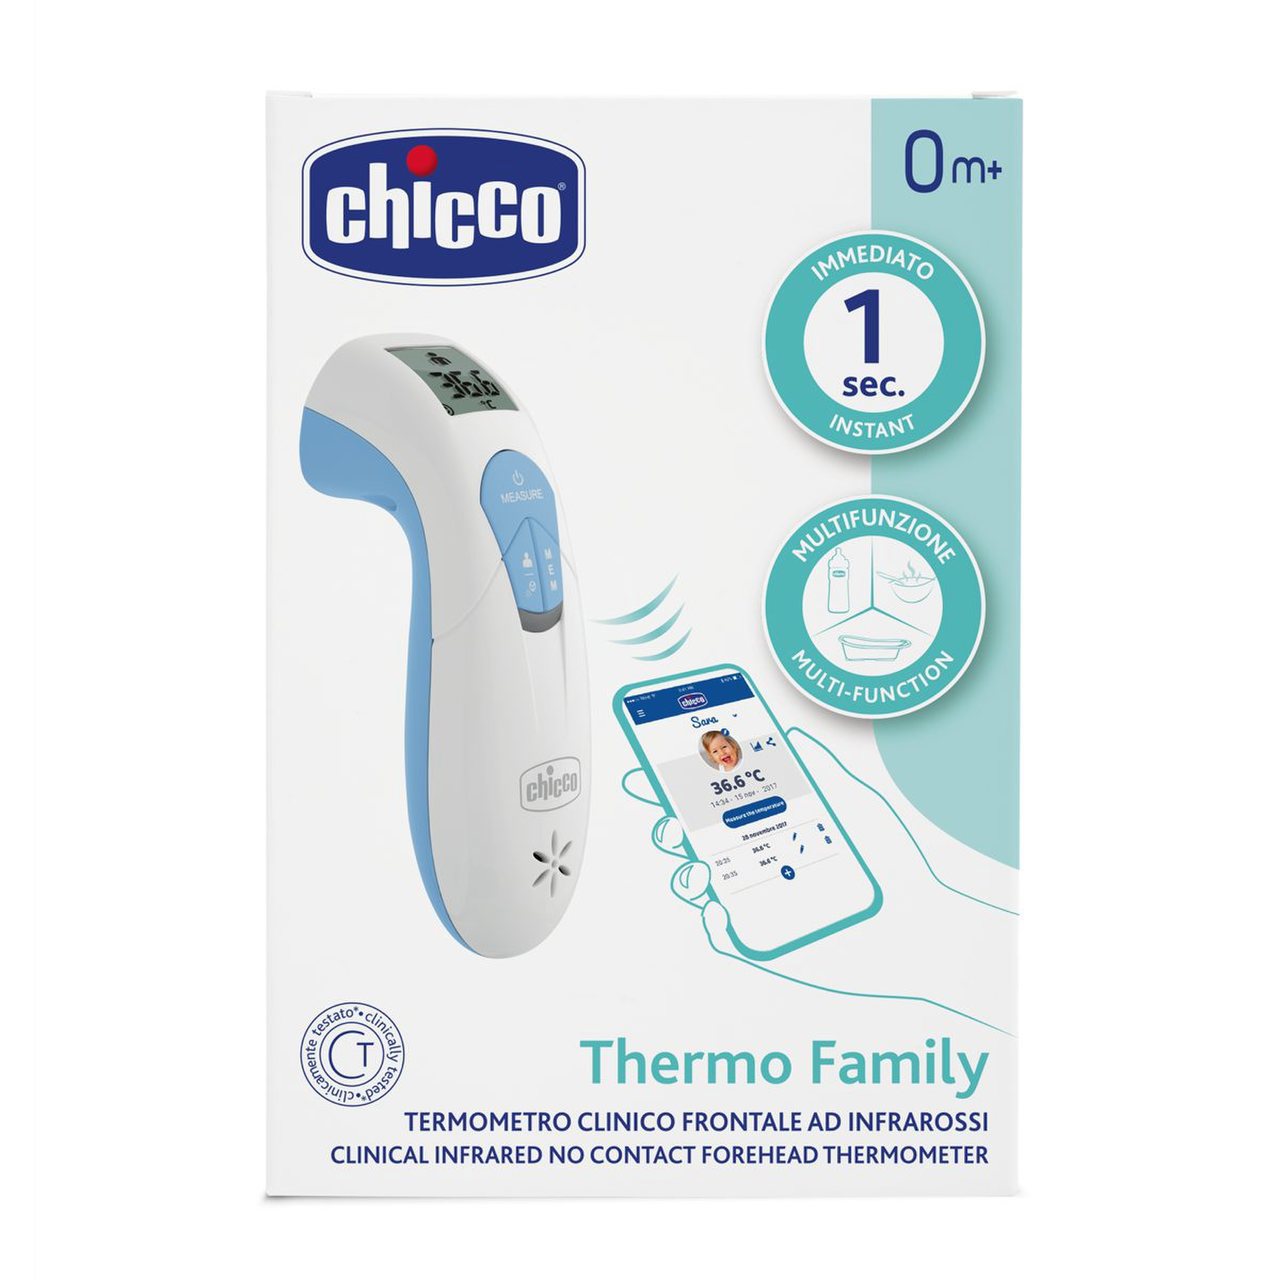 Infrarot-Thermometer Chicco Thermo Family